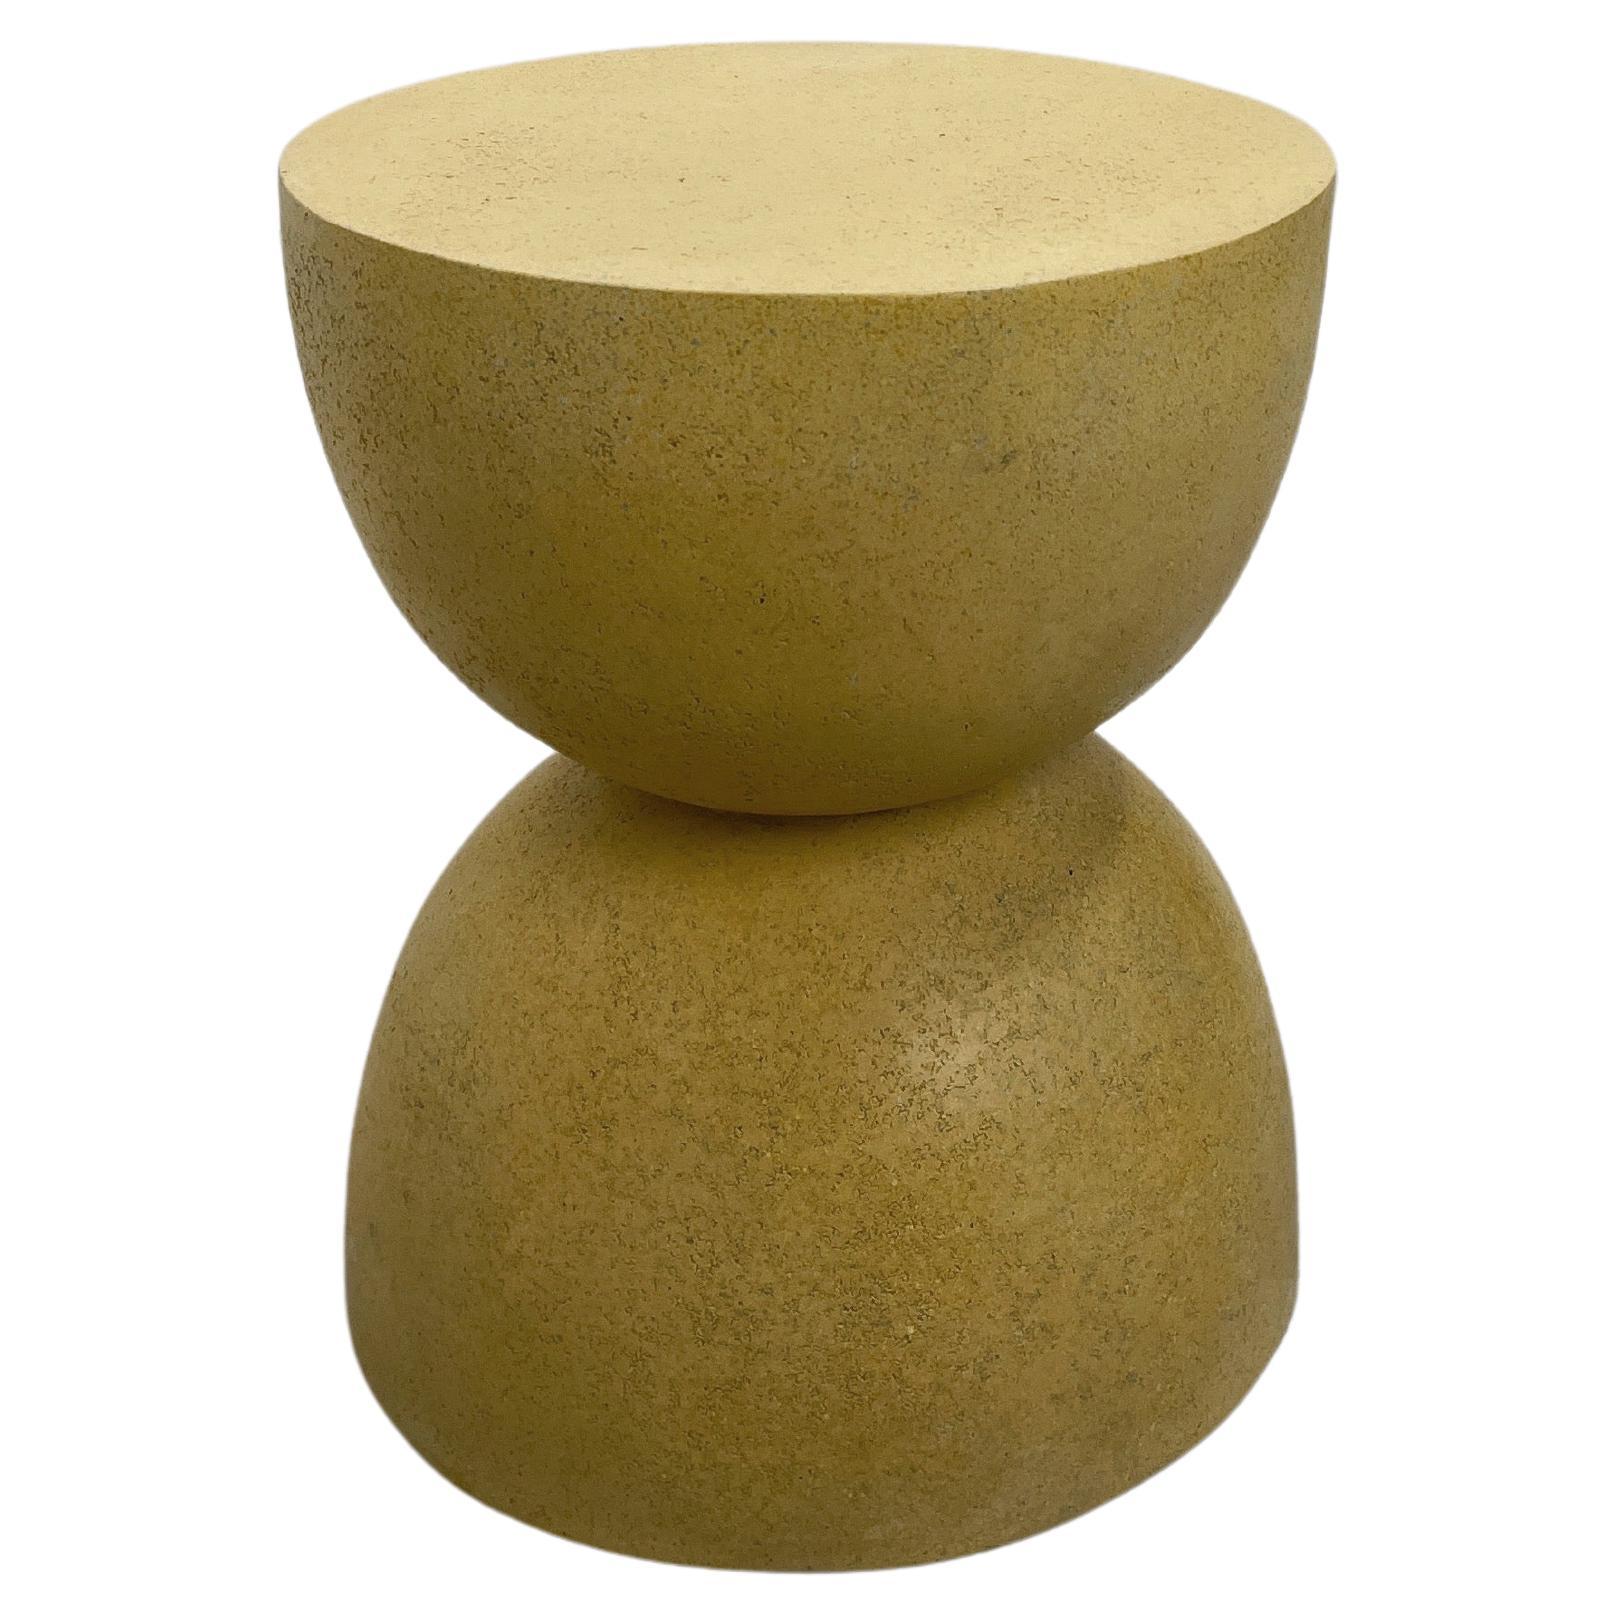 Cast Resin 'Bilbouquet' Side Table, Sonoran Yellow Finish by Zachary A. Design For Sale